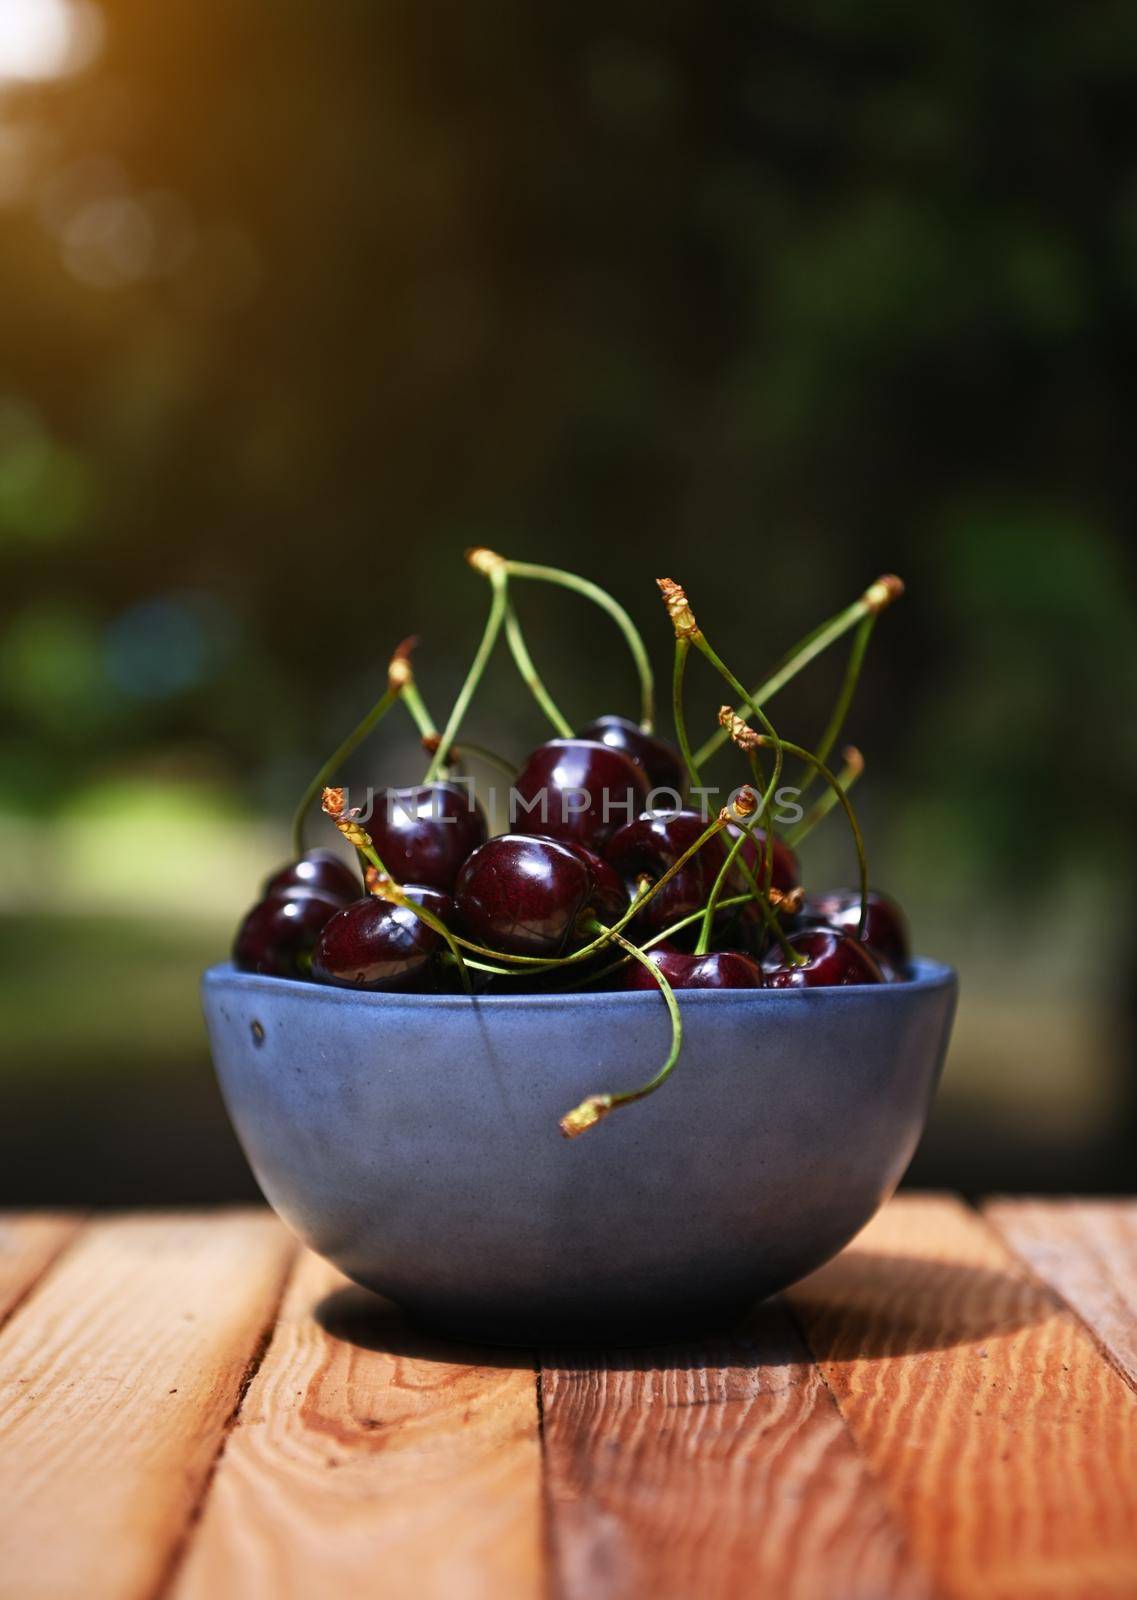 Close-up of ripe, ready-to-eat cherry berries in the blue ceramic bowl on wooden surface with a country orchard in the background. Still life, copy ad space for advertising text